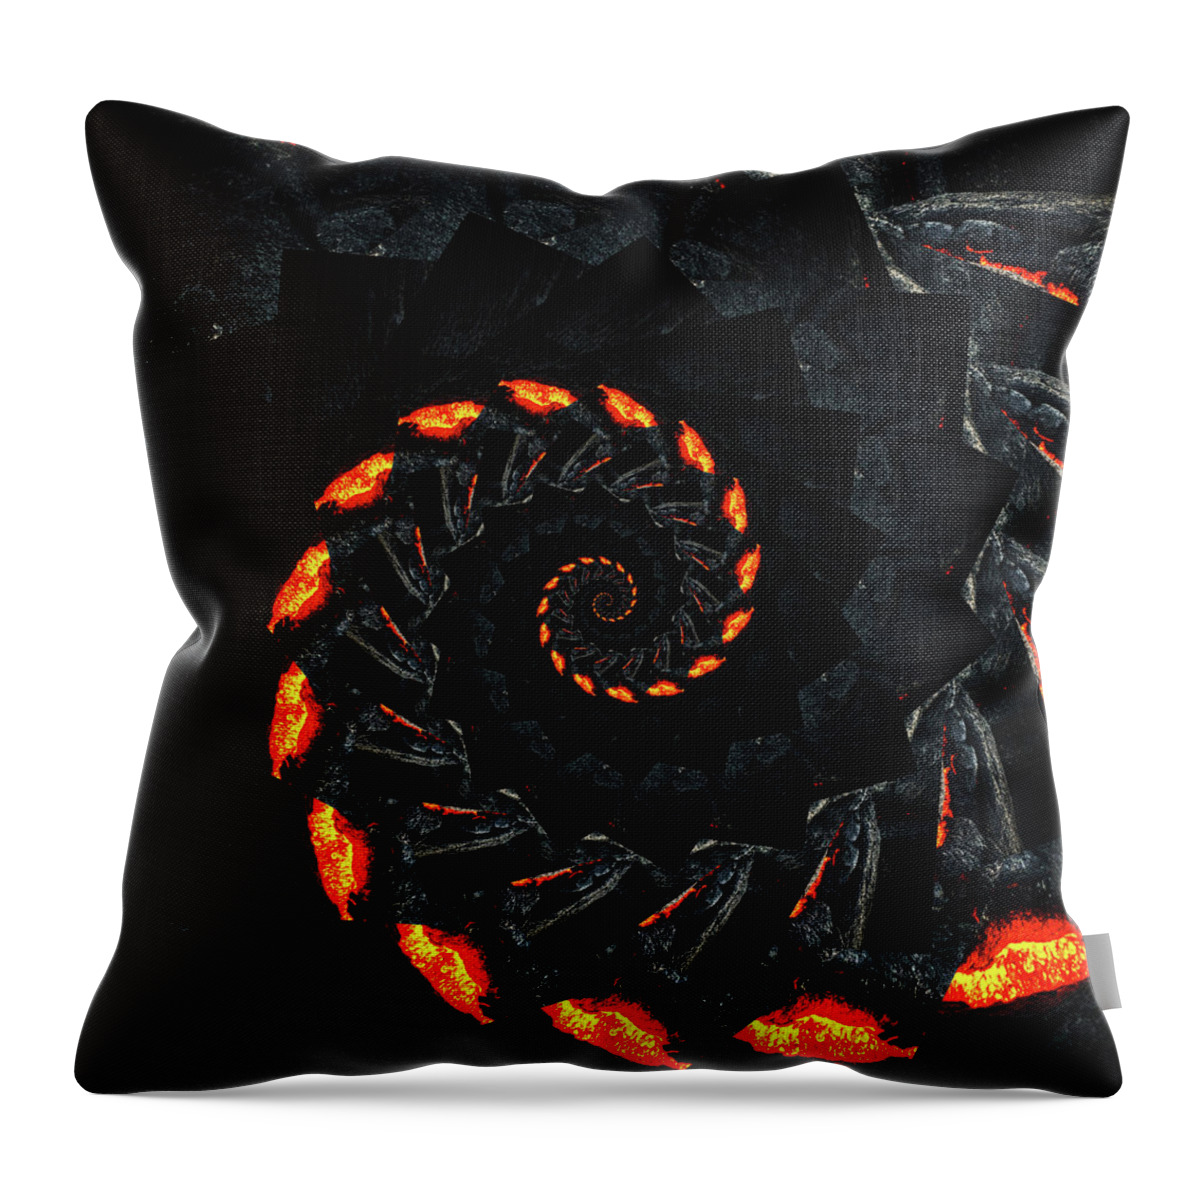 Endless Throw Pillow featuring the digital art Infinity Tunnel Spiral Lava 2 by Pelo Blanco Photo